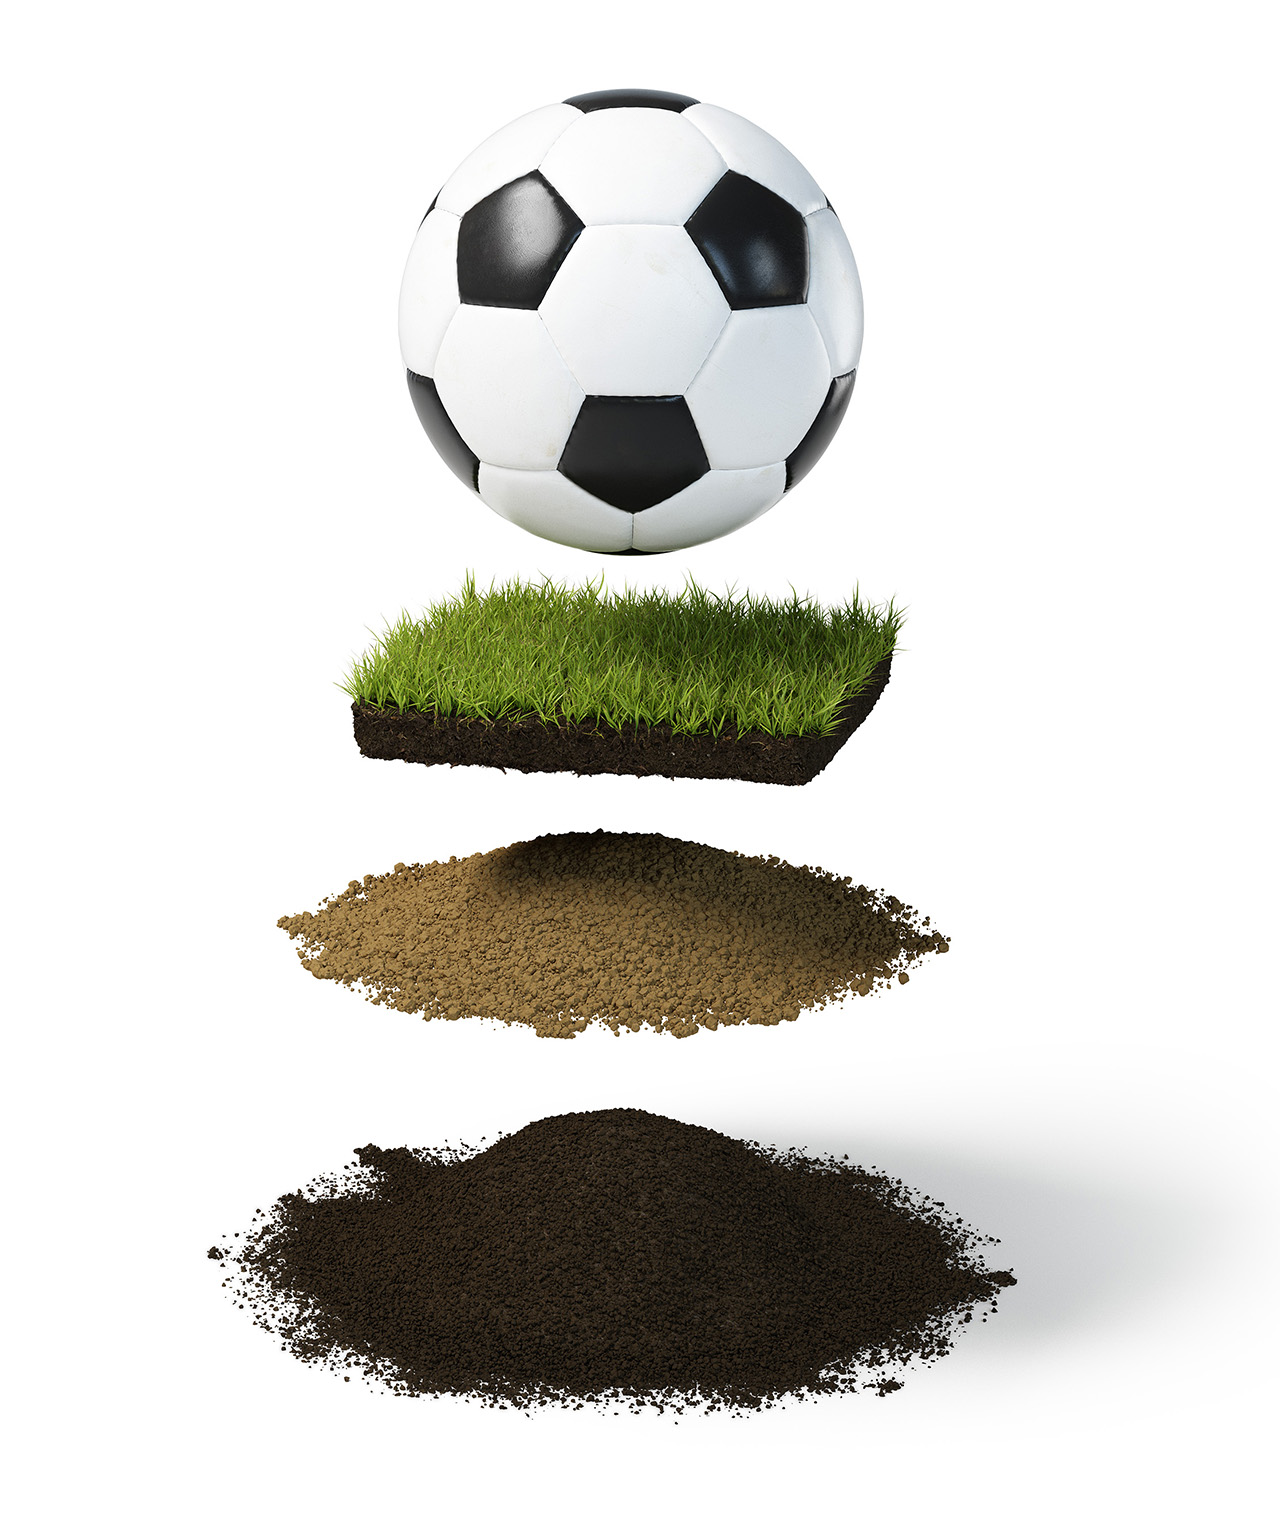 Football and wheel tires on land plants with different layers of gravel stone ground asphalt and sewer pipe fotboll gräs mark hjul genomskärning sand grus stenar